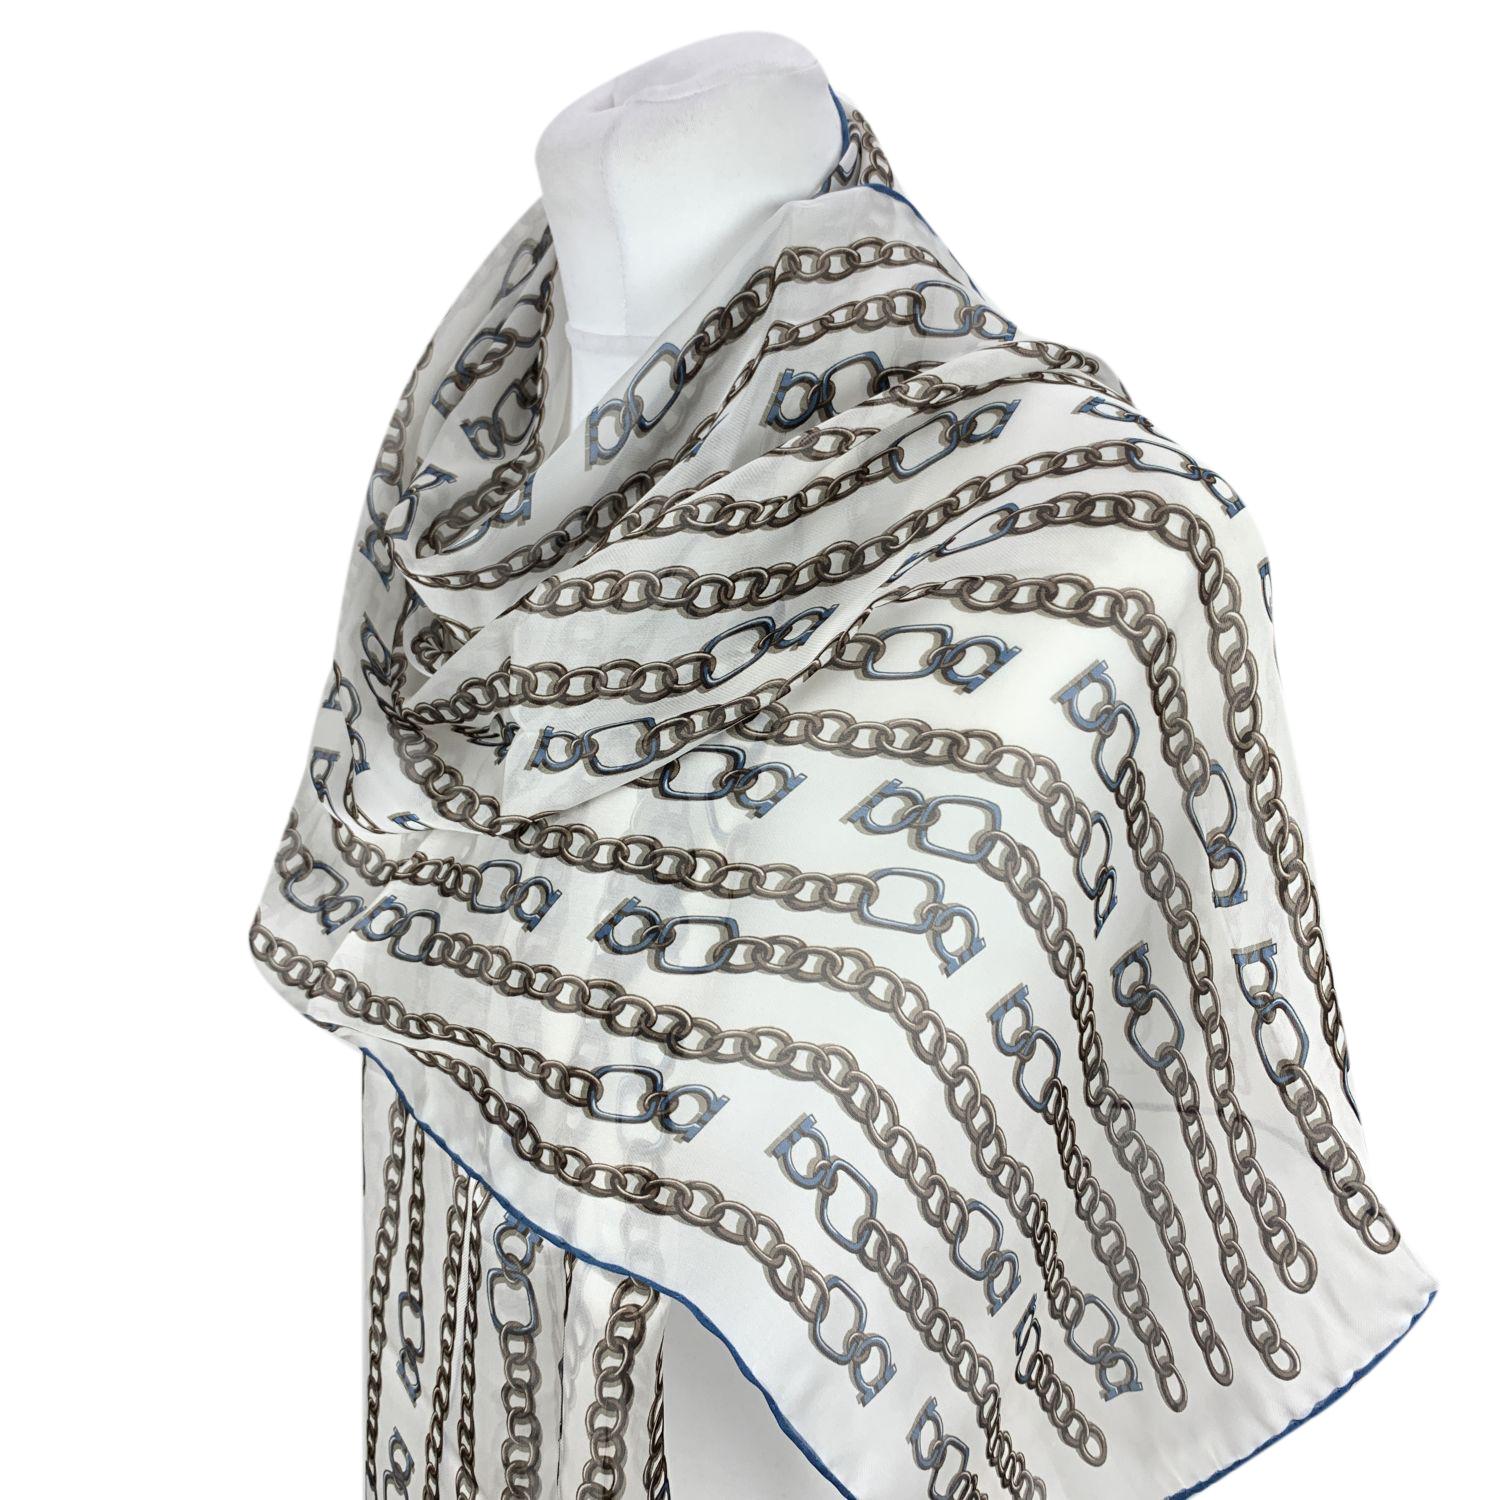 Salvatore Ferragamo 'Catena' oblong scarf. Chain and Gancini print. Whie color. Composition: 100 Silk. Measurements: 63 x 18 inches - 160 x 45 cm. Made in Italy.

Retail price was 195 Euros


Details

MATERIAL: Silk

COLOR: White

MODEL: Catena